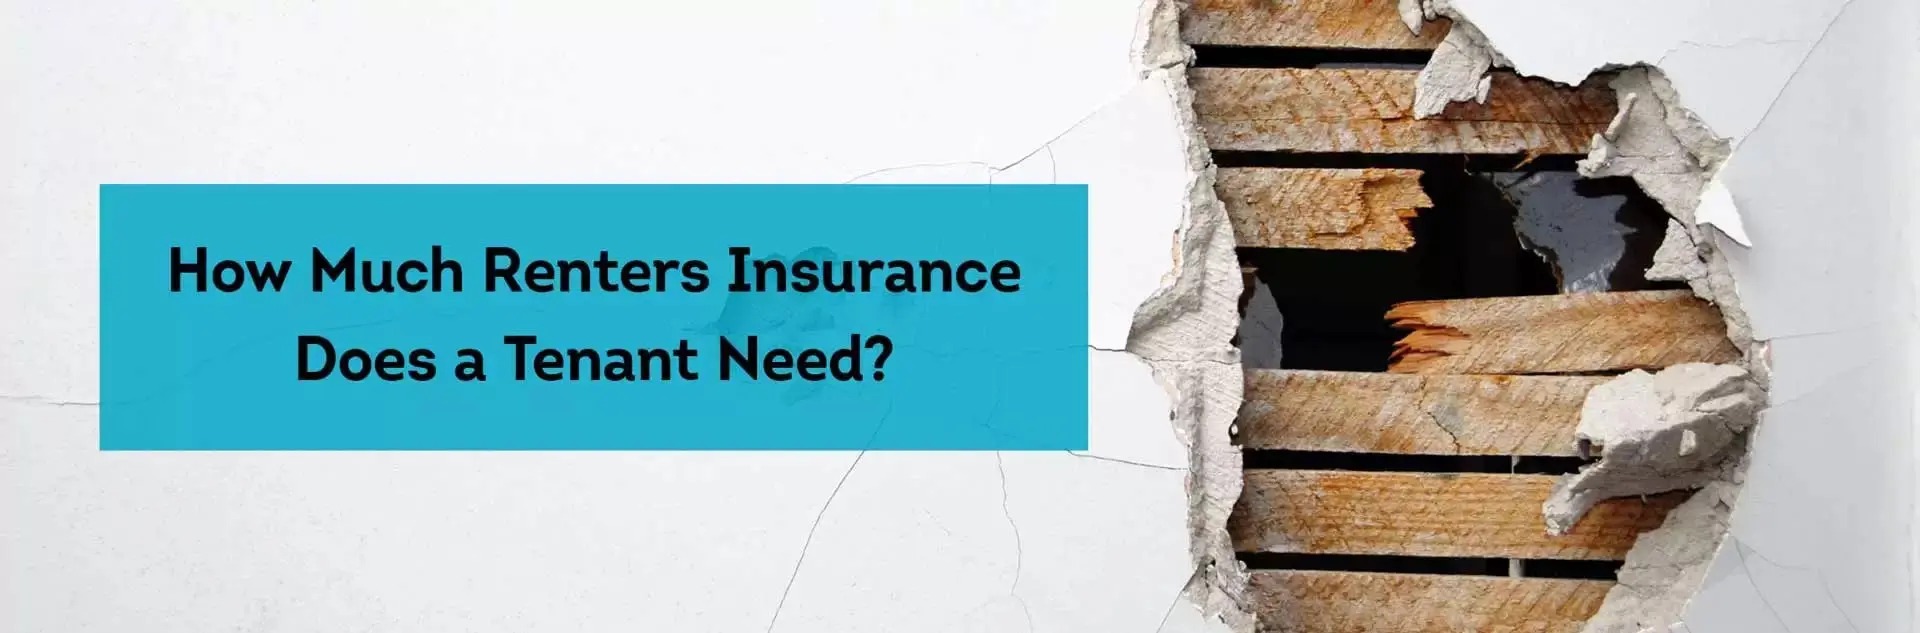 How Much Renters Insurance Should A Landlord Require